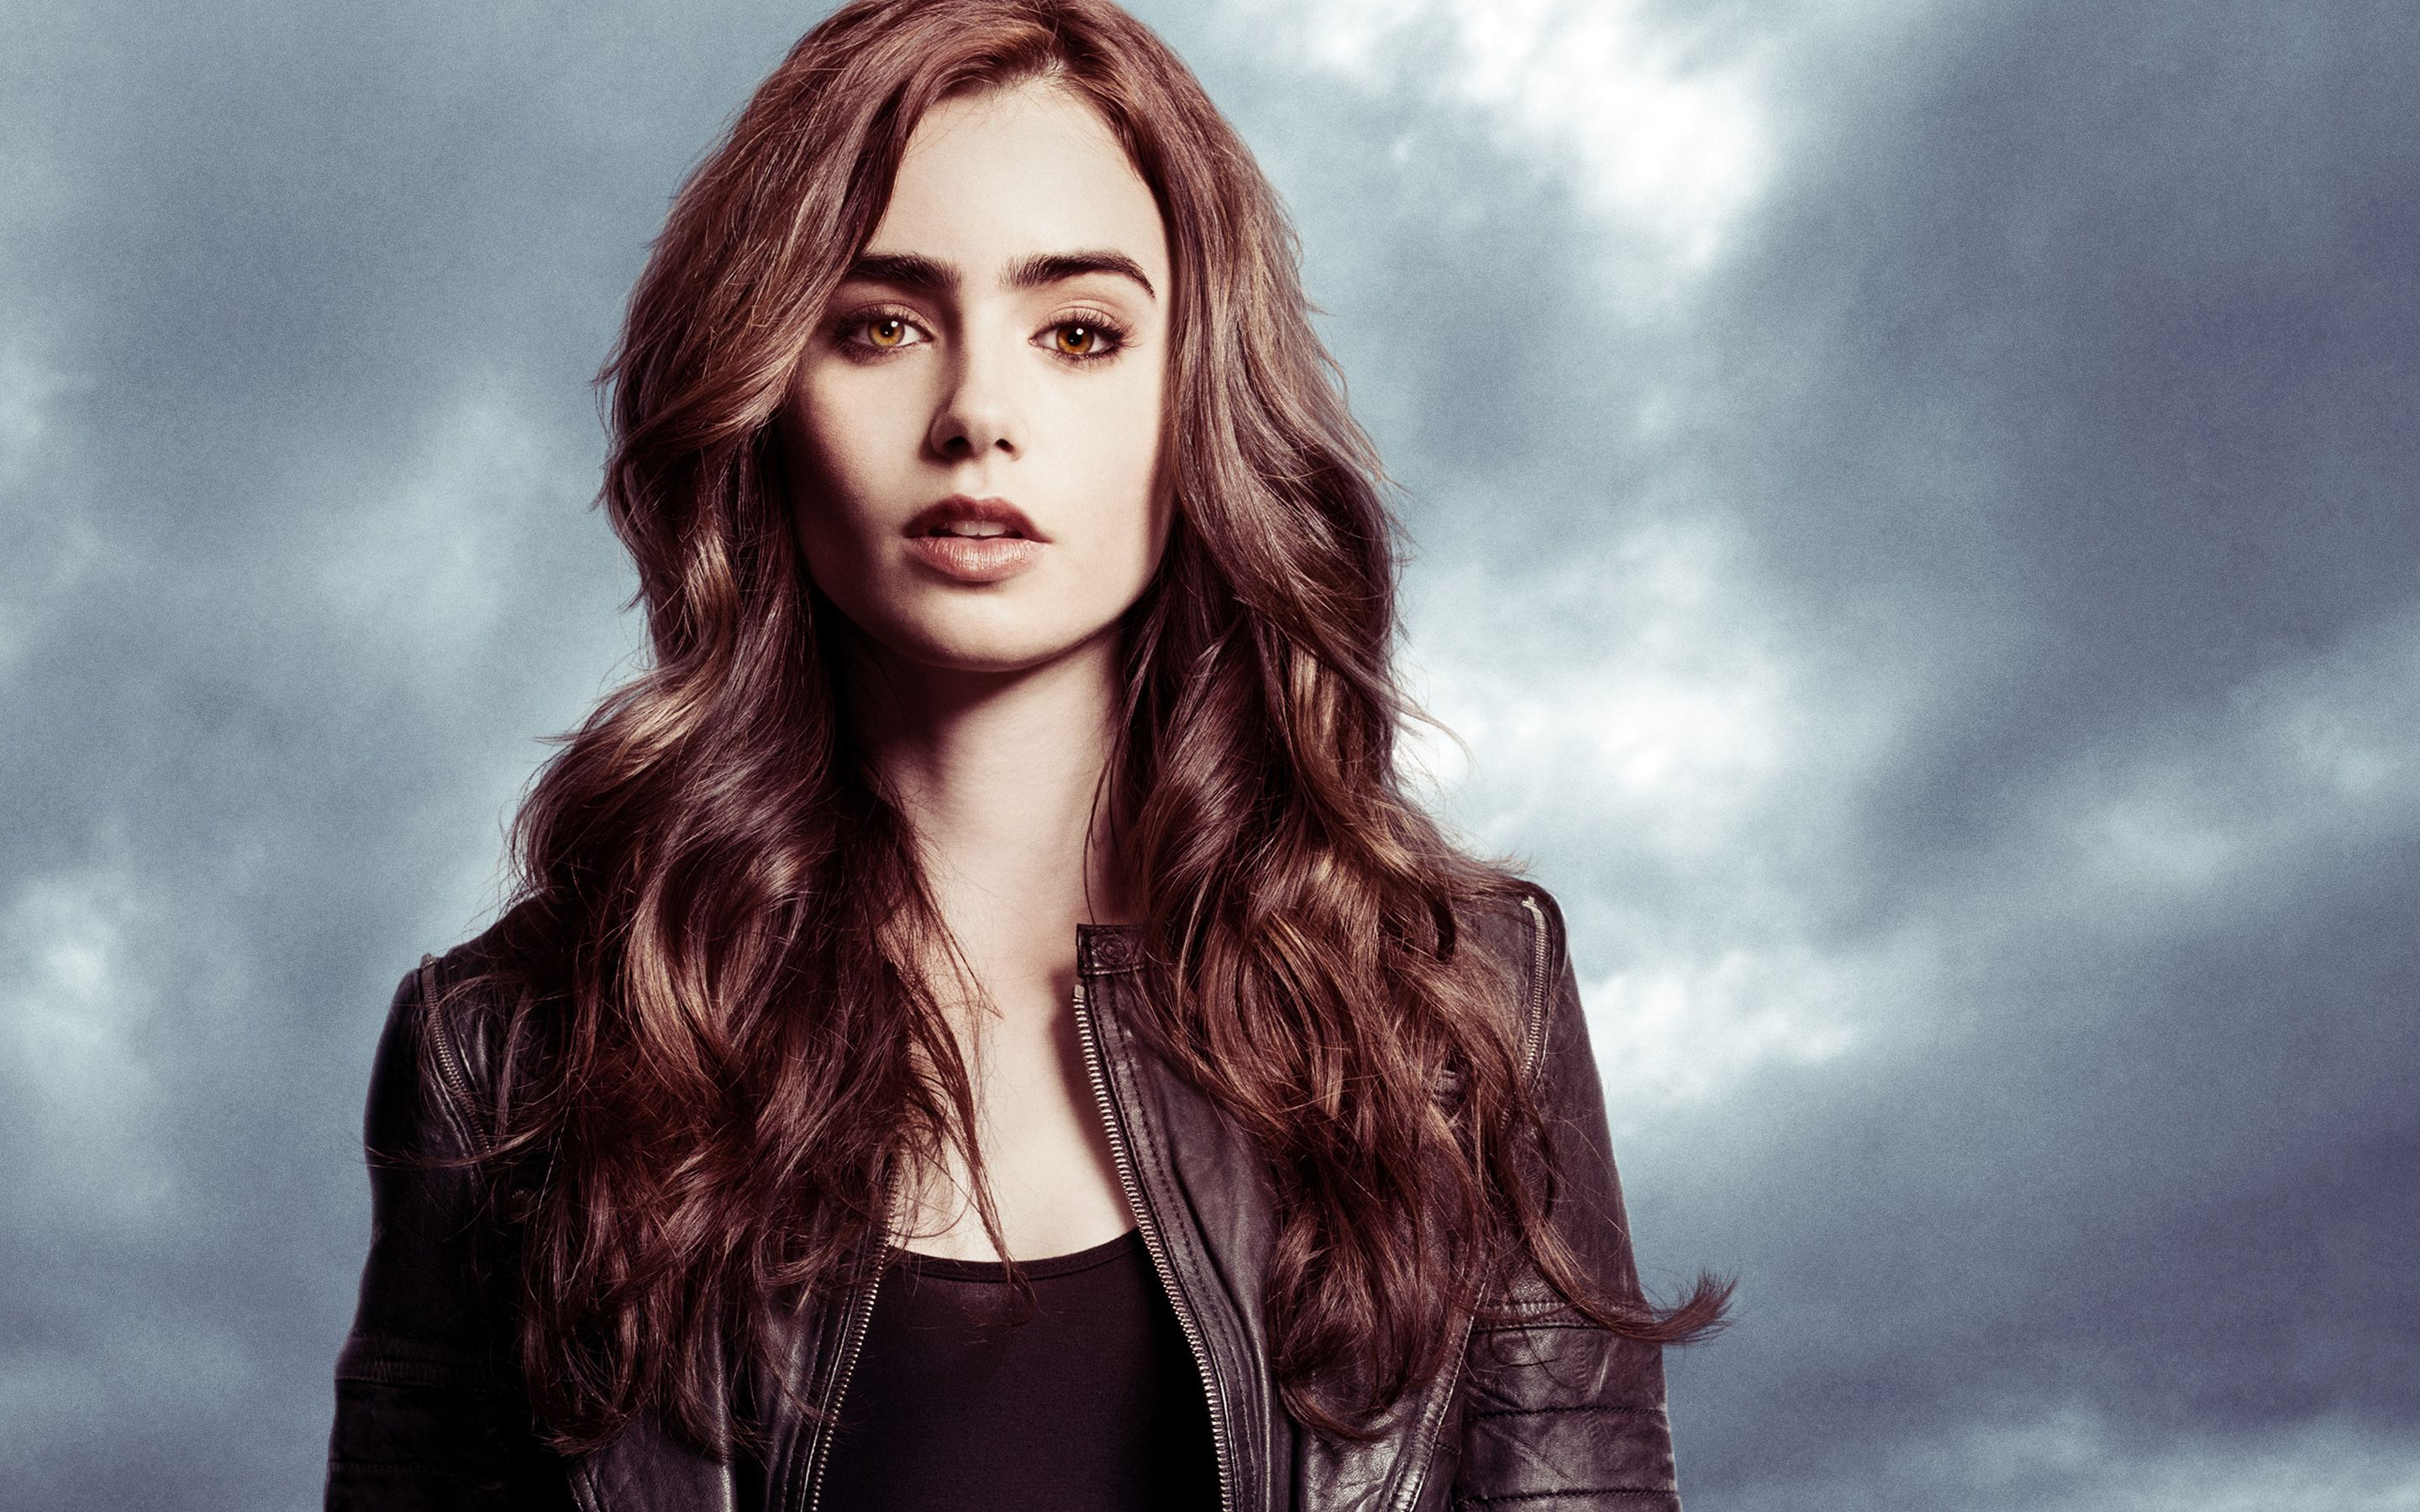 2880x1800 Lily collins, The mortal instruments, The daughter movie